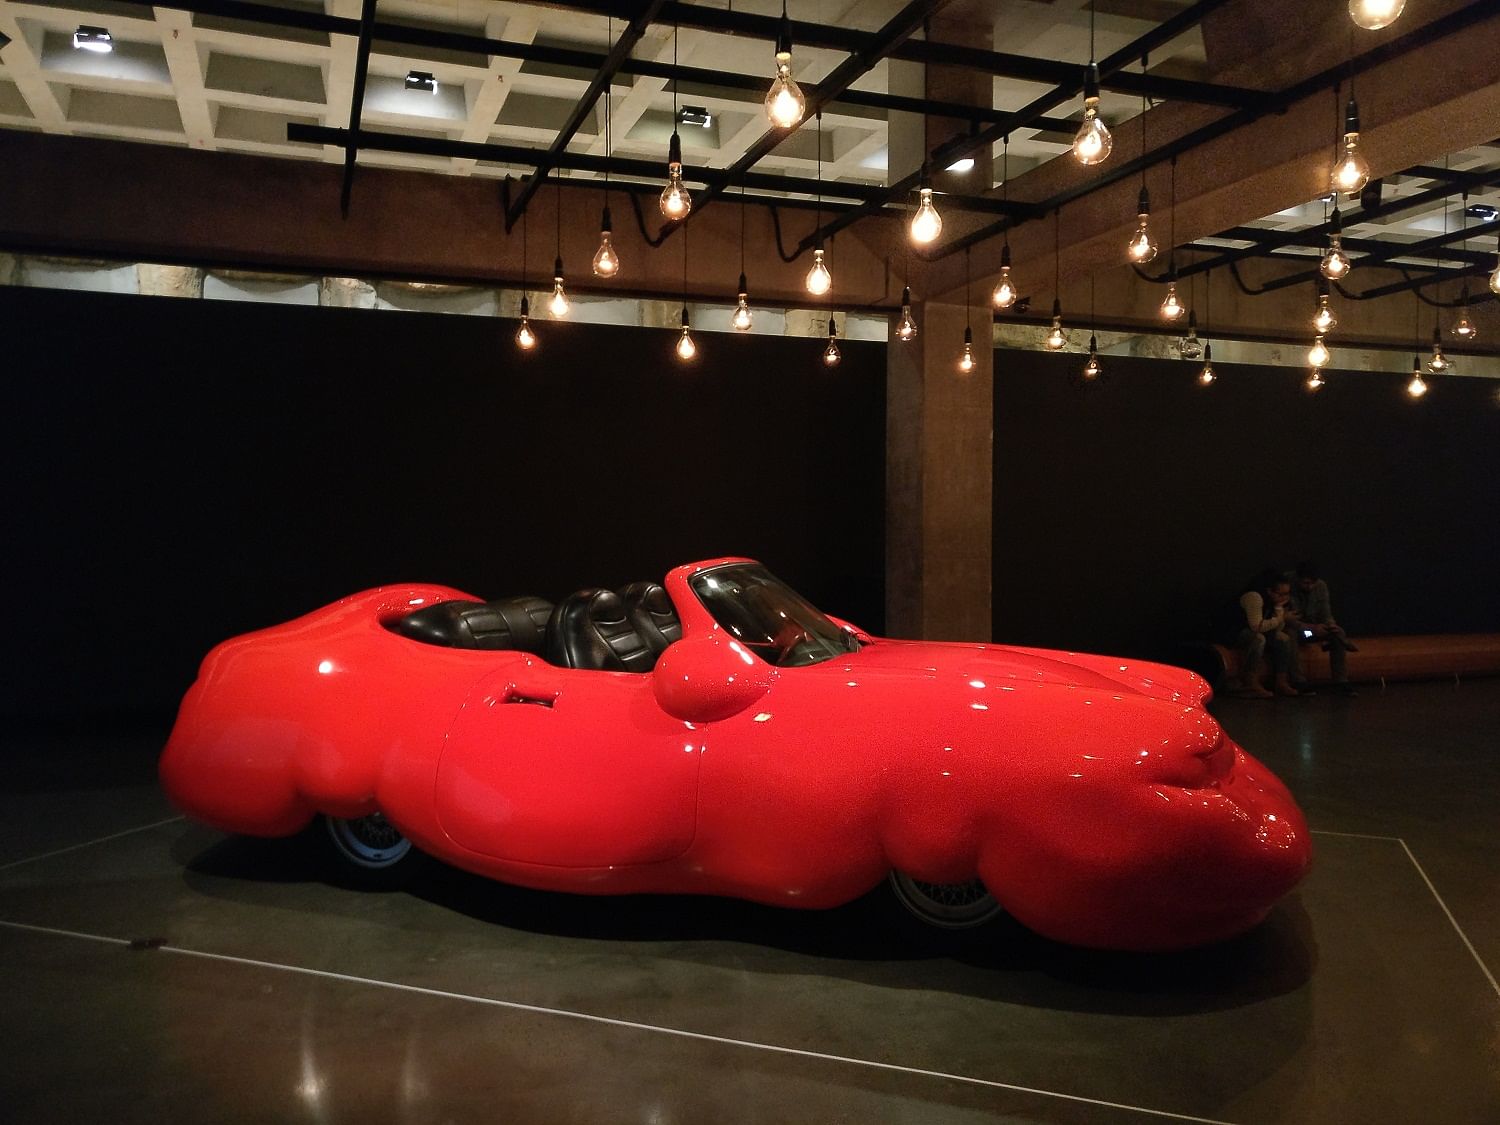 Fat Car, one of the exhibits at MONA